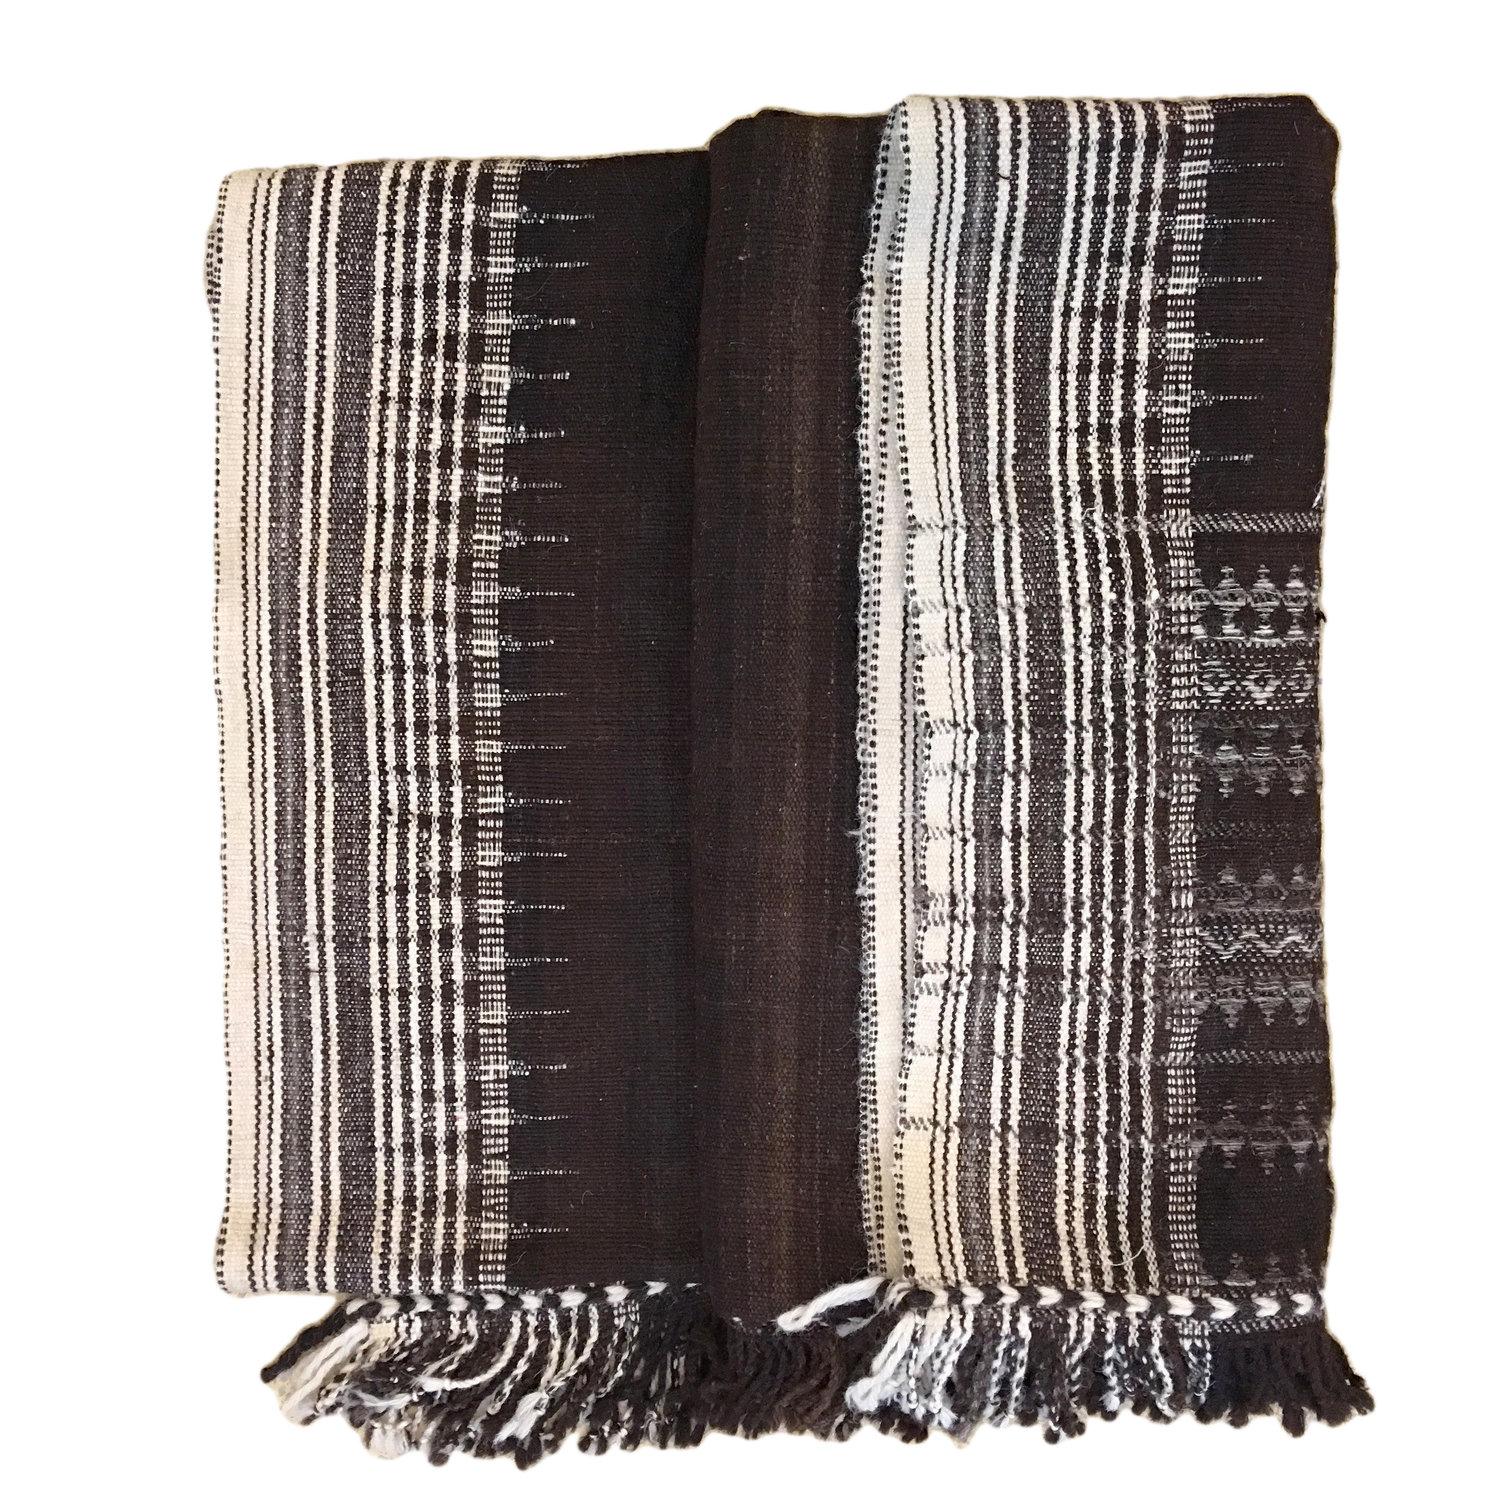 100/% Wool Hand Woven Blanket or Shawl